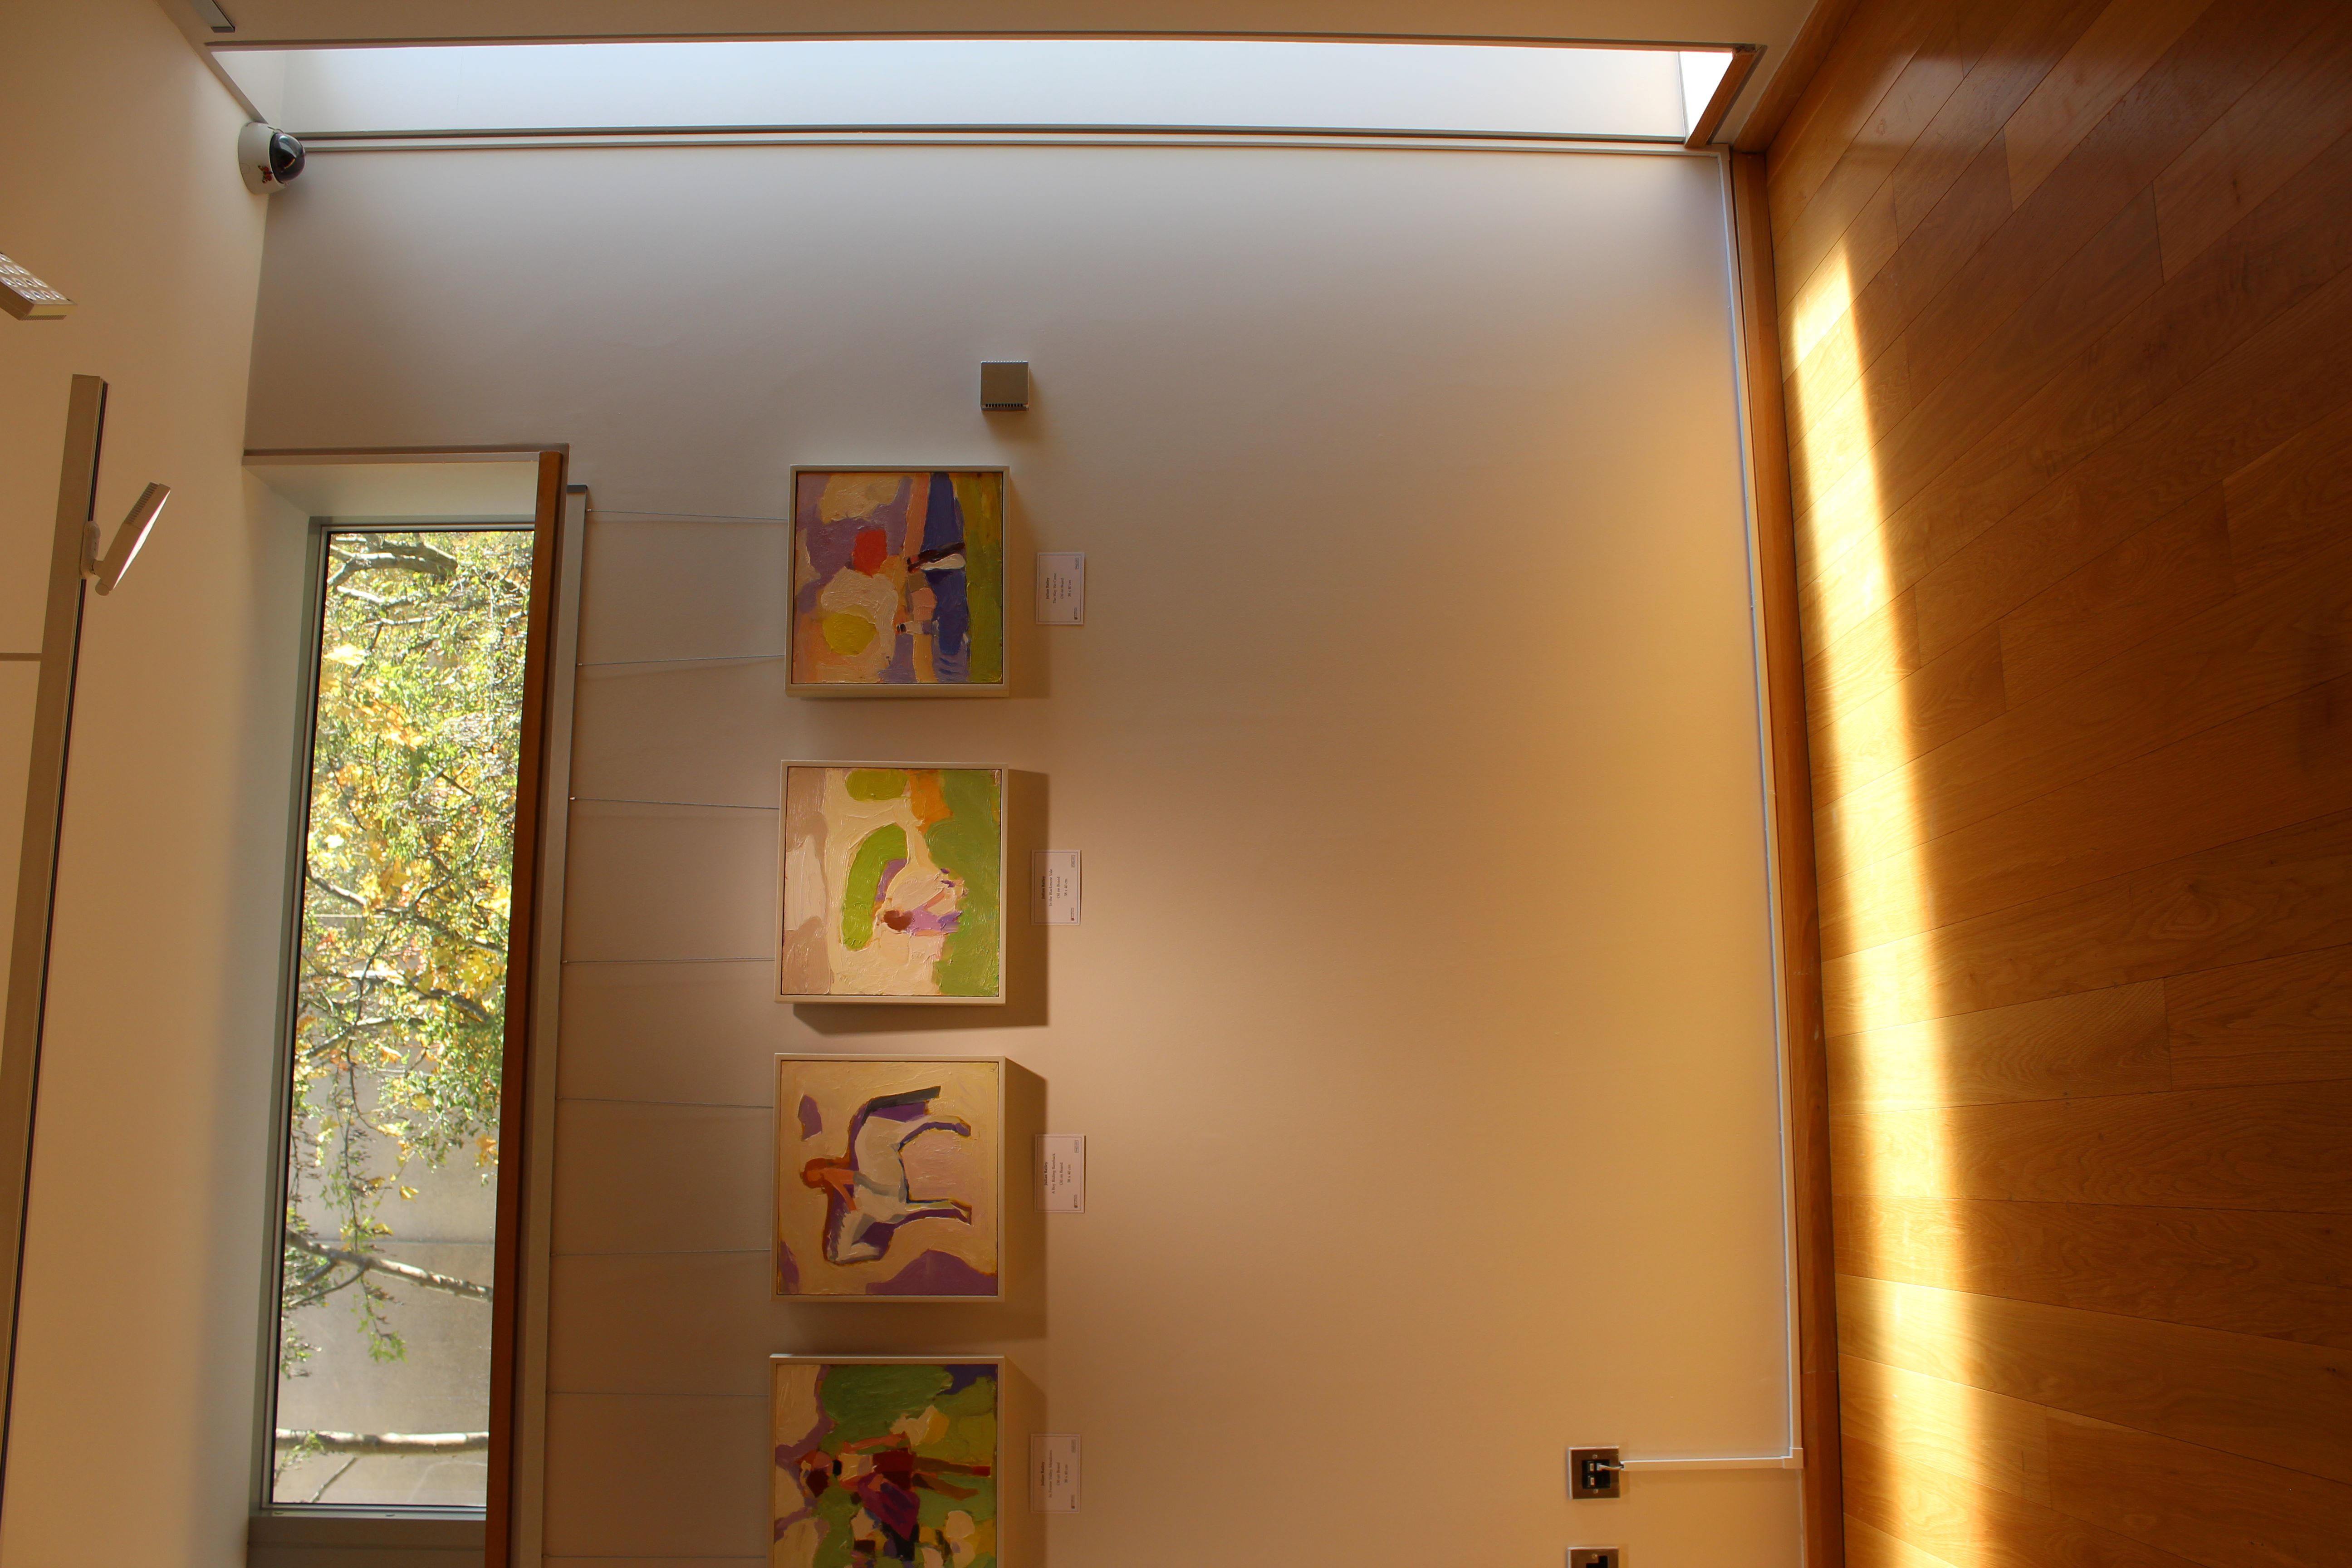 A wide shot of the gallery, with four paintings by Julian Bailey. The long window on the right hand side is casting a light on the wooden floor.